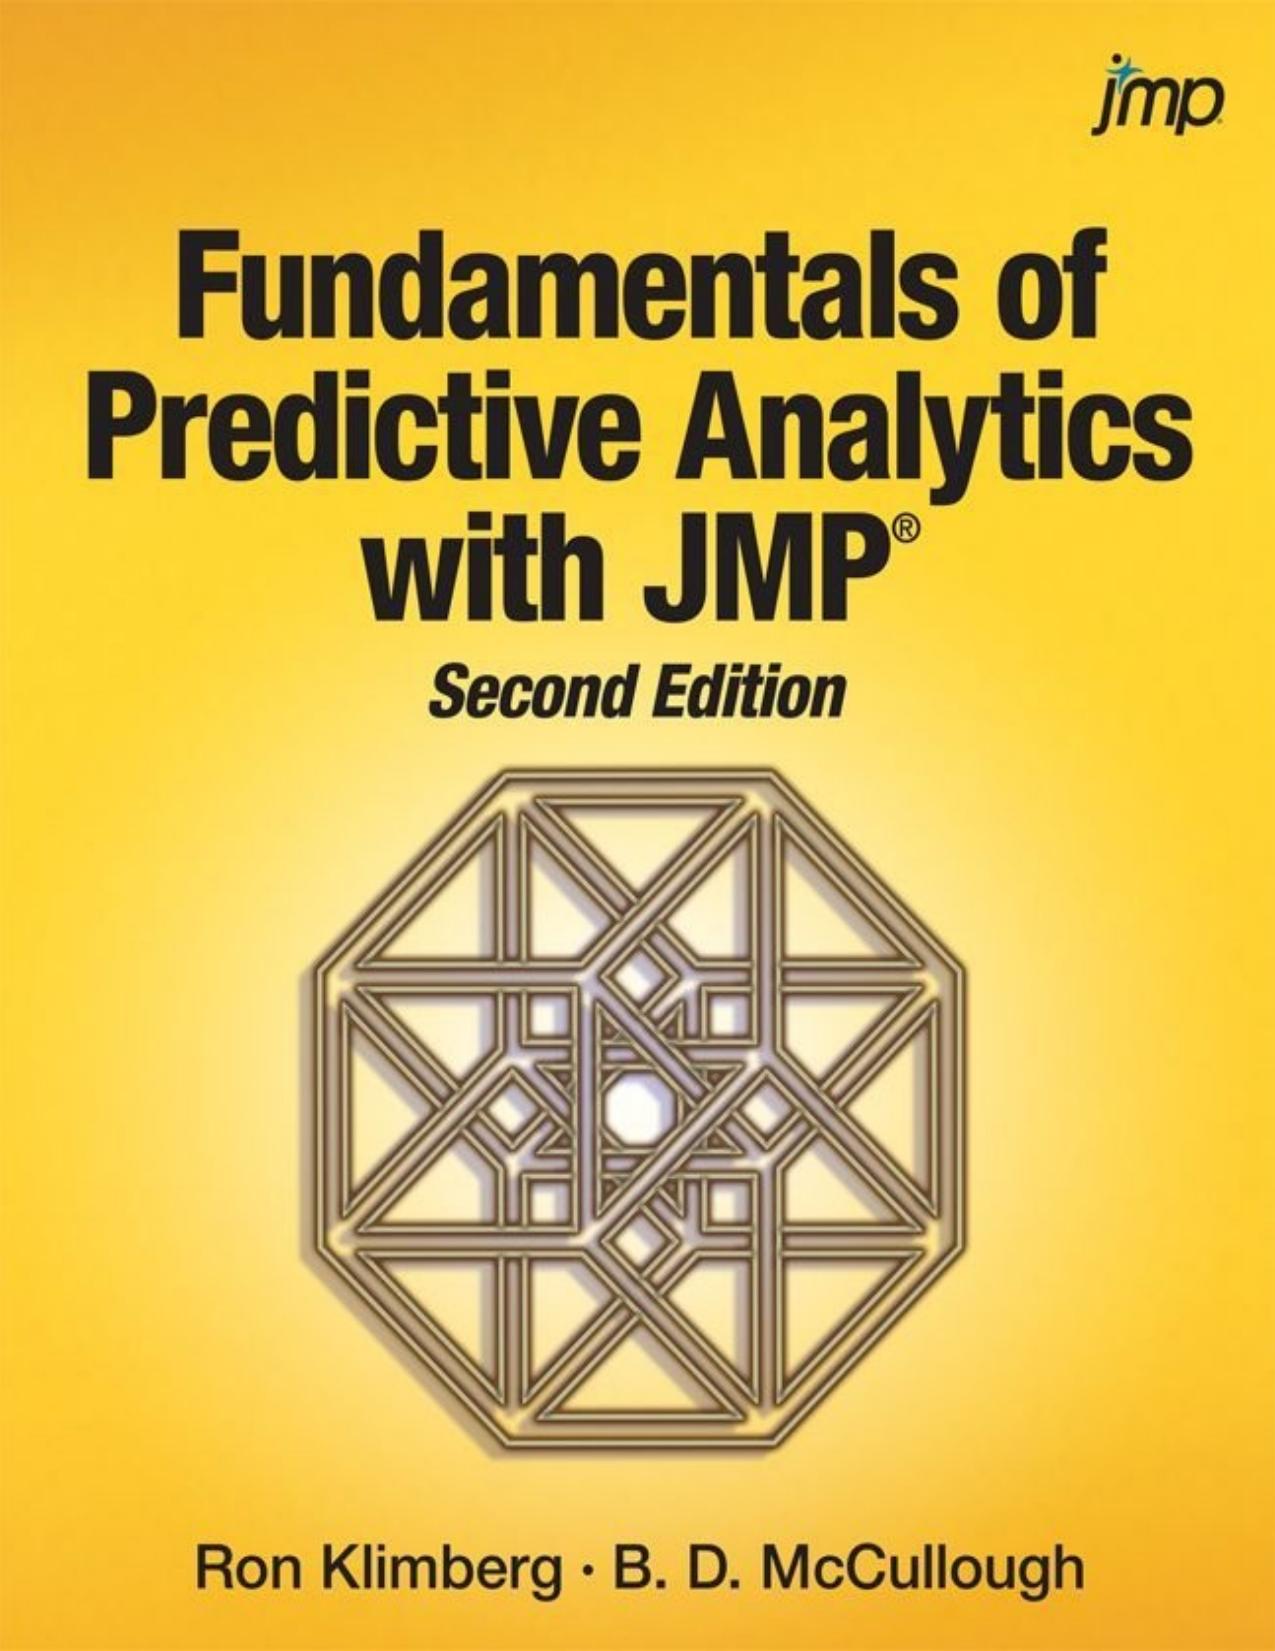 Fundamentals of Predictive Analytics with JMP, Second Edition by Klimberg PhD Ron & B. D. McCullough